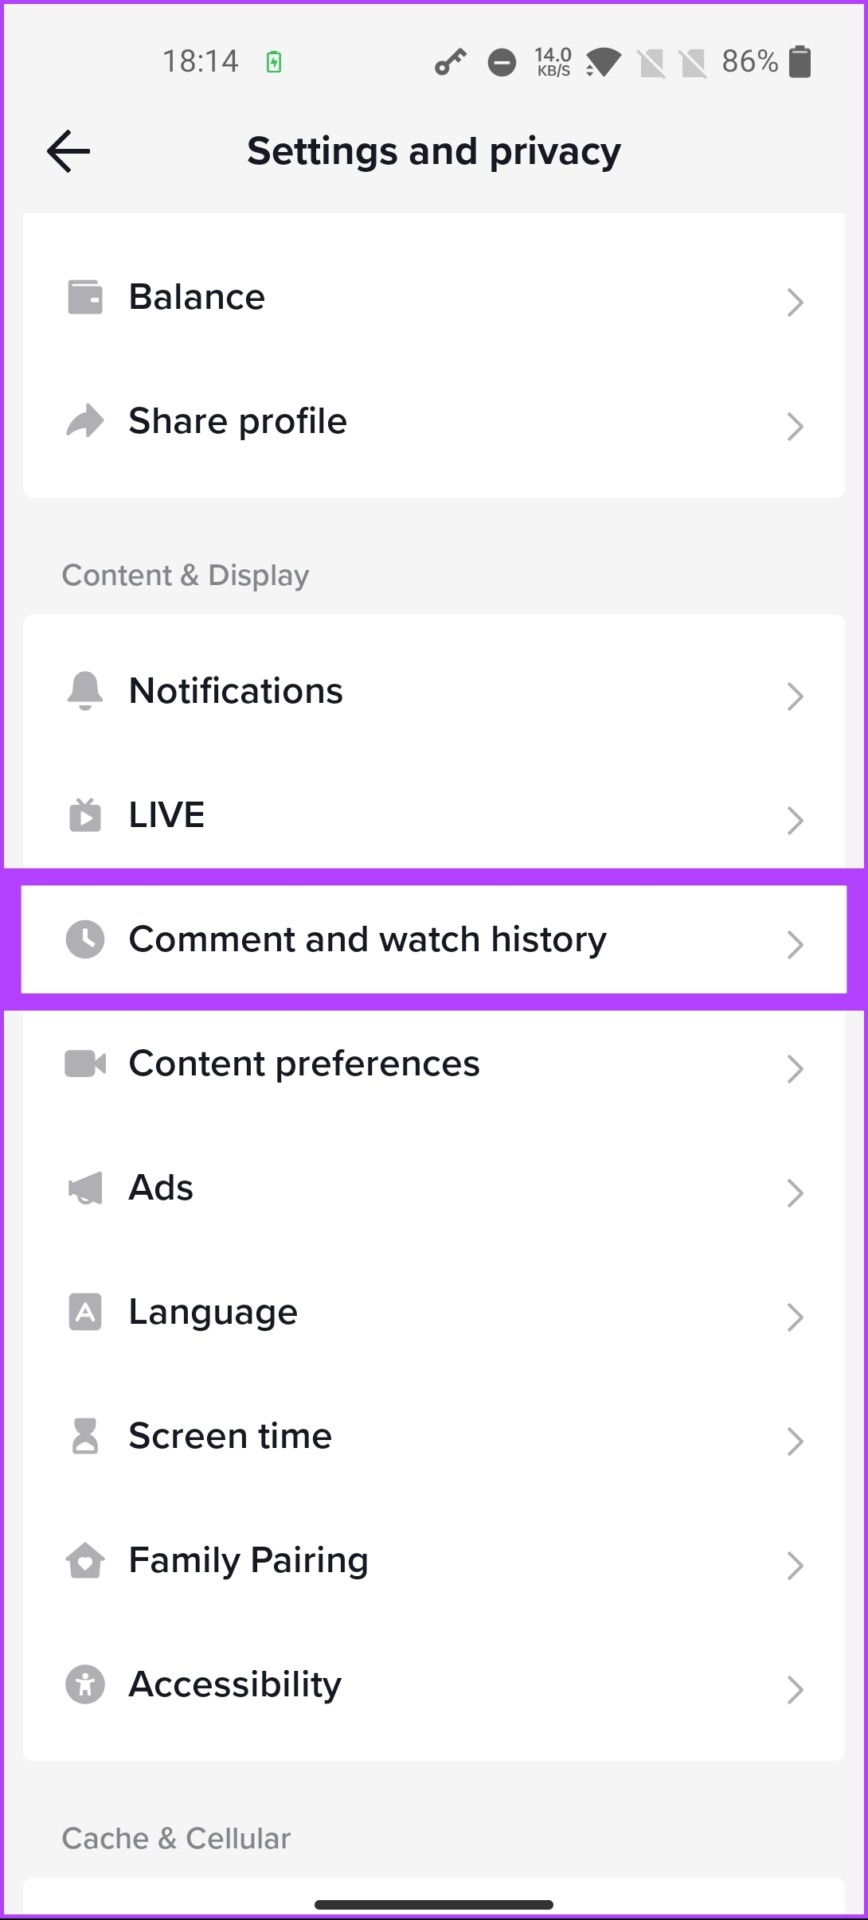 select 'Comment and watch history.'